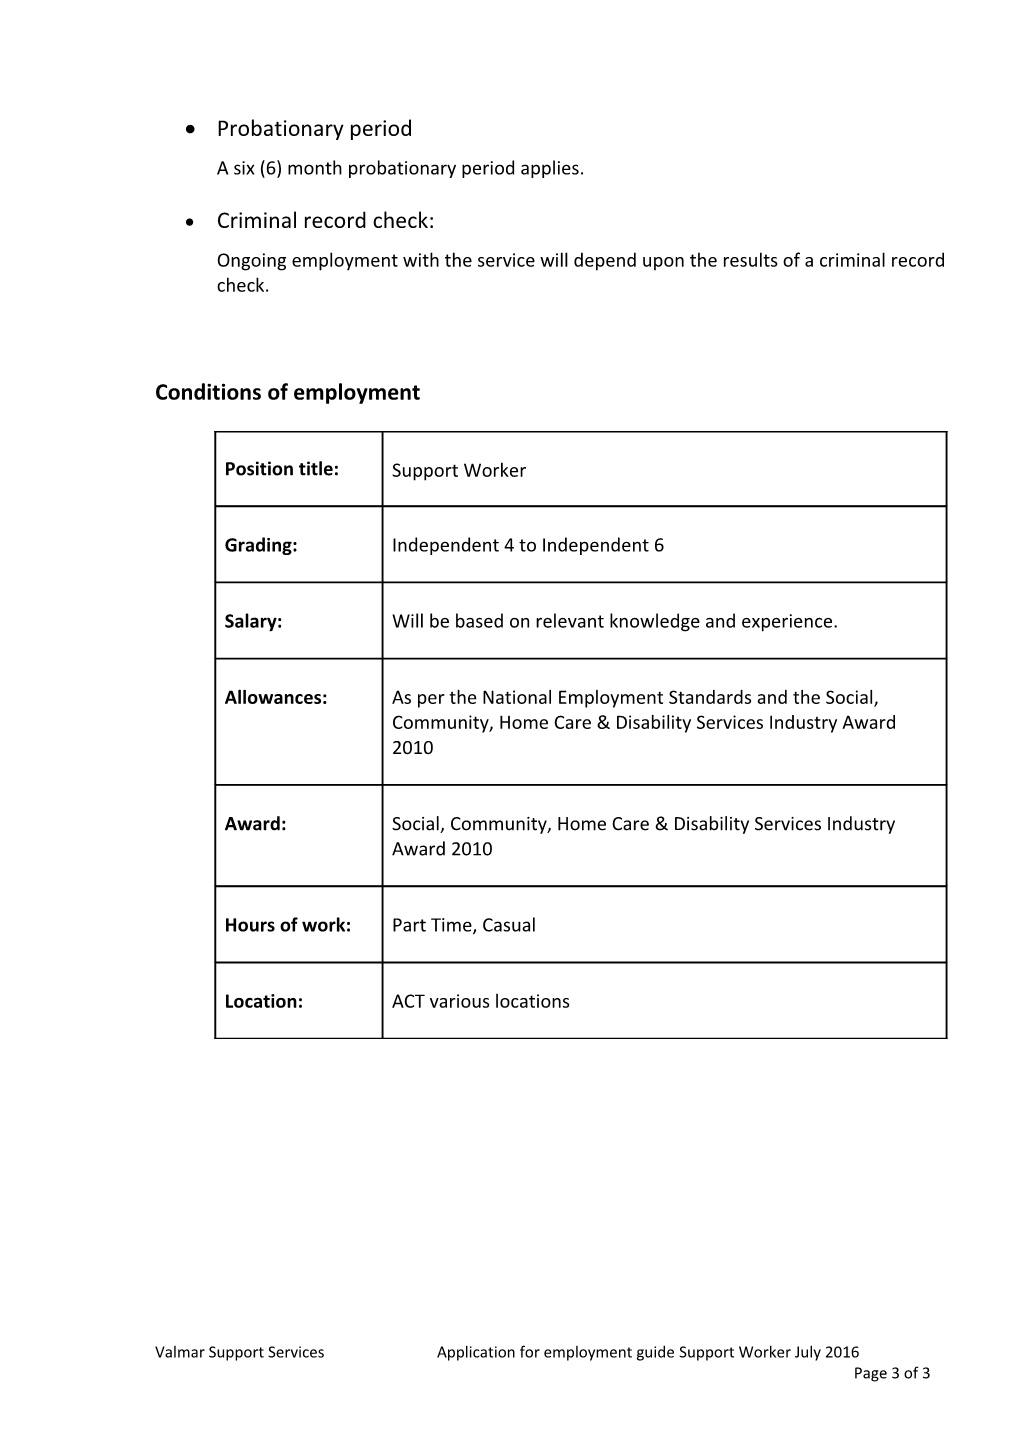 Guide to Preparing Your Application for Employment